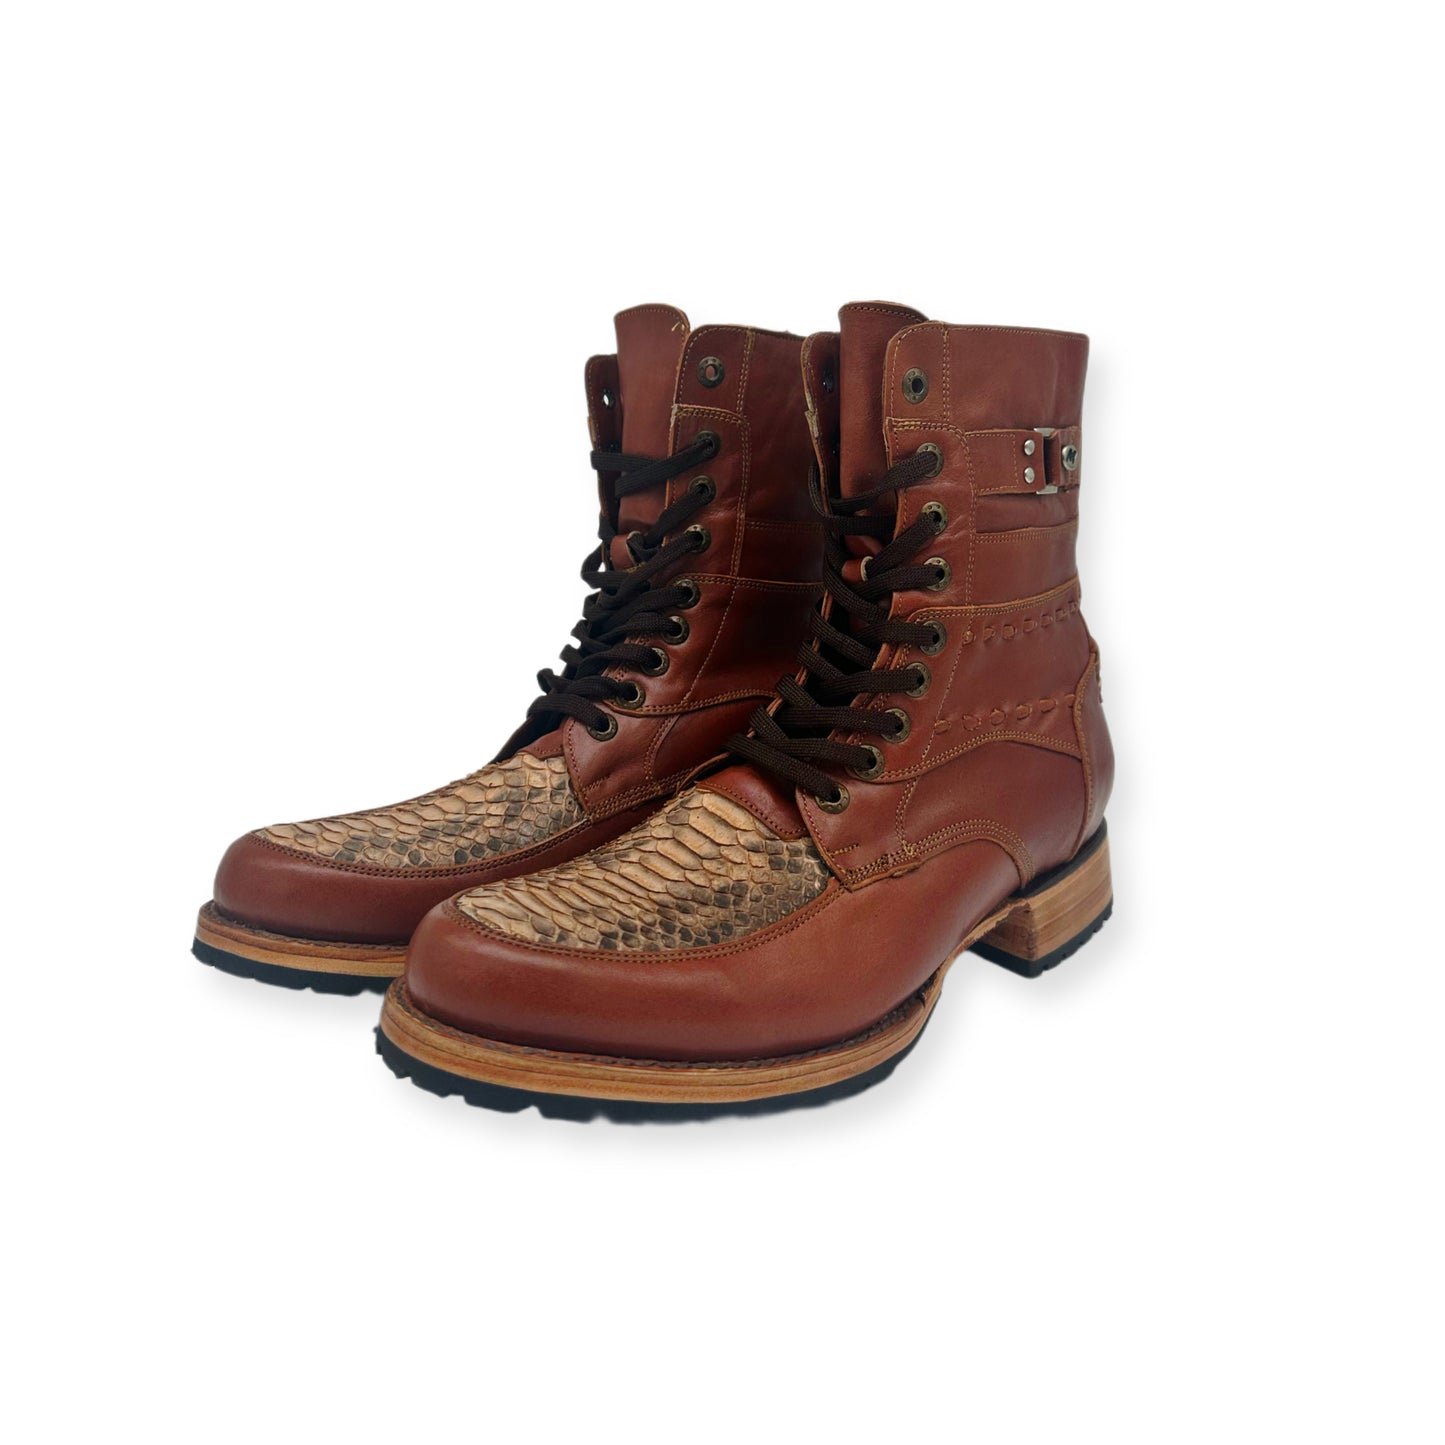 Python Snakeskin Expedition  Lace-Up Hiking Boots